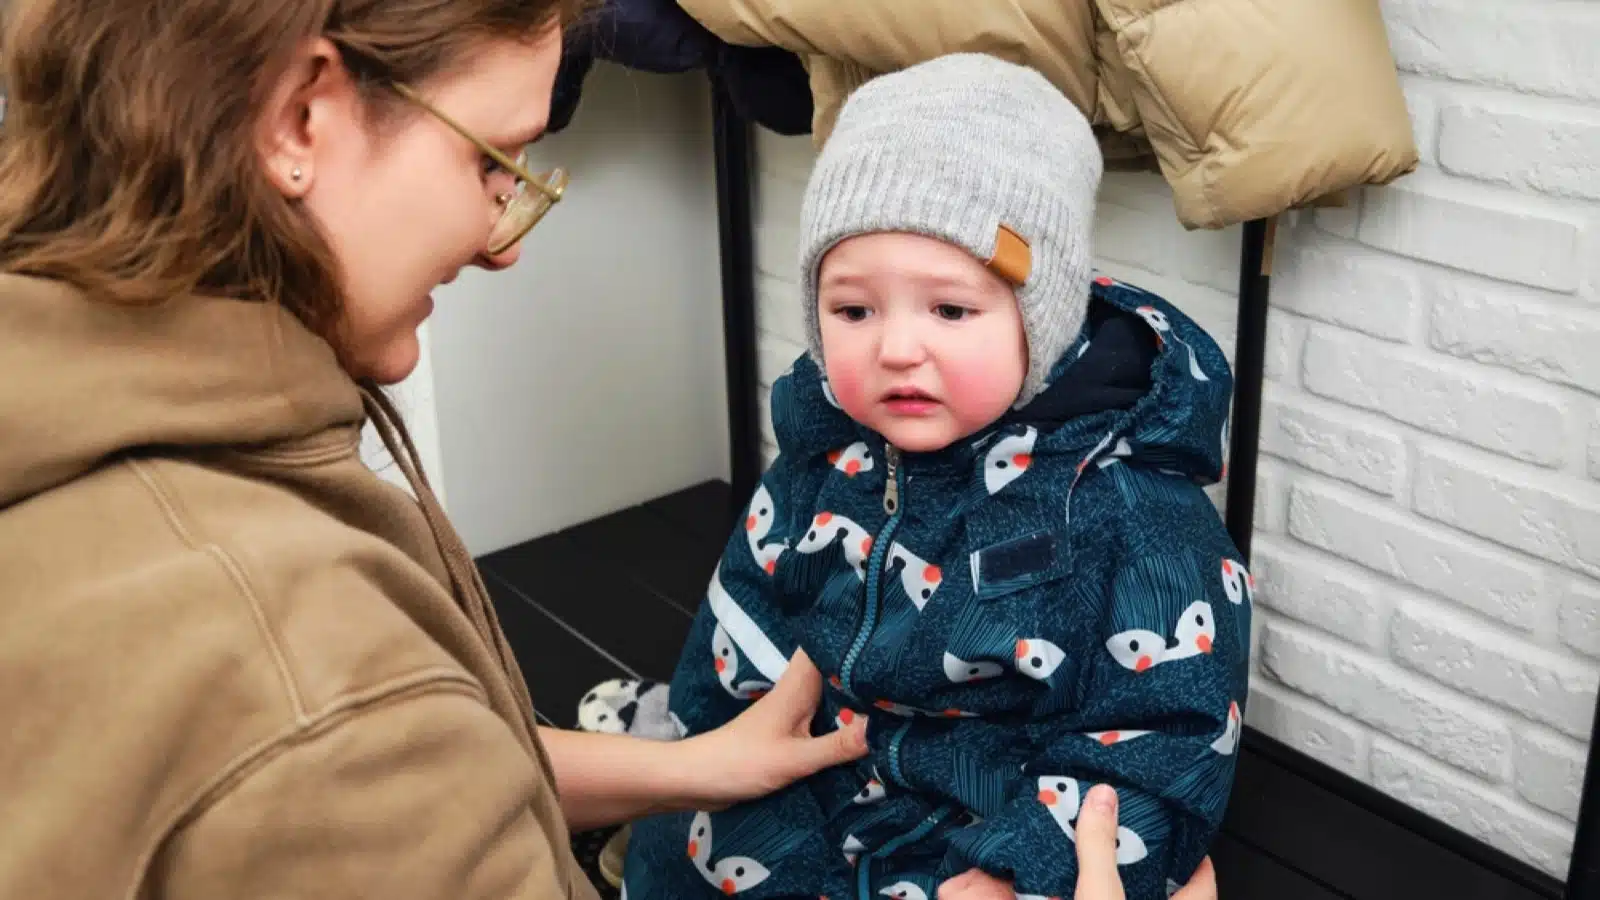 Woman dressing baby for cold weather